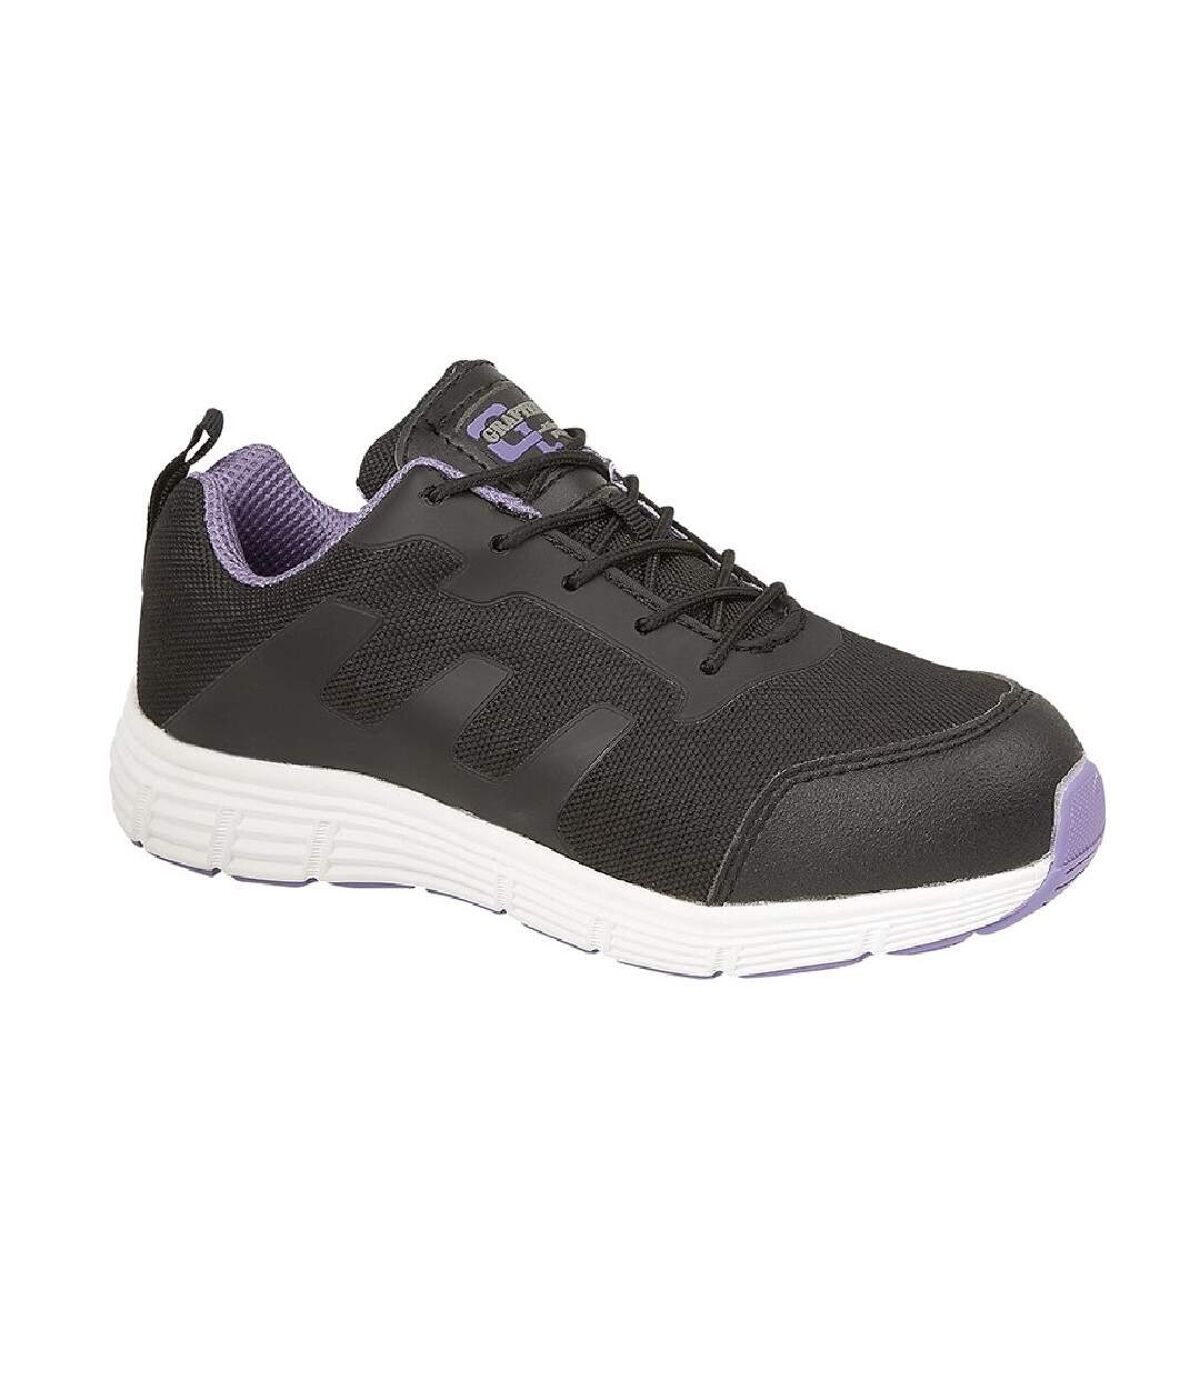 Grafters Womens/Ladies Toe Capped Safety Trainers (Black/Lilac) - UTDF1546